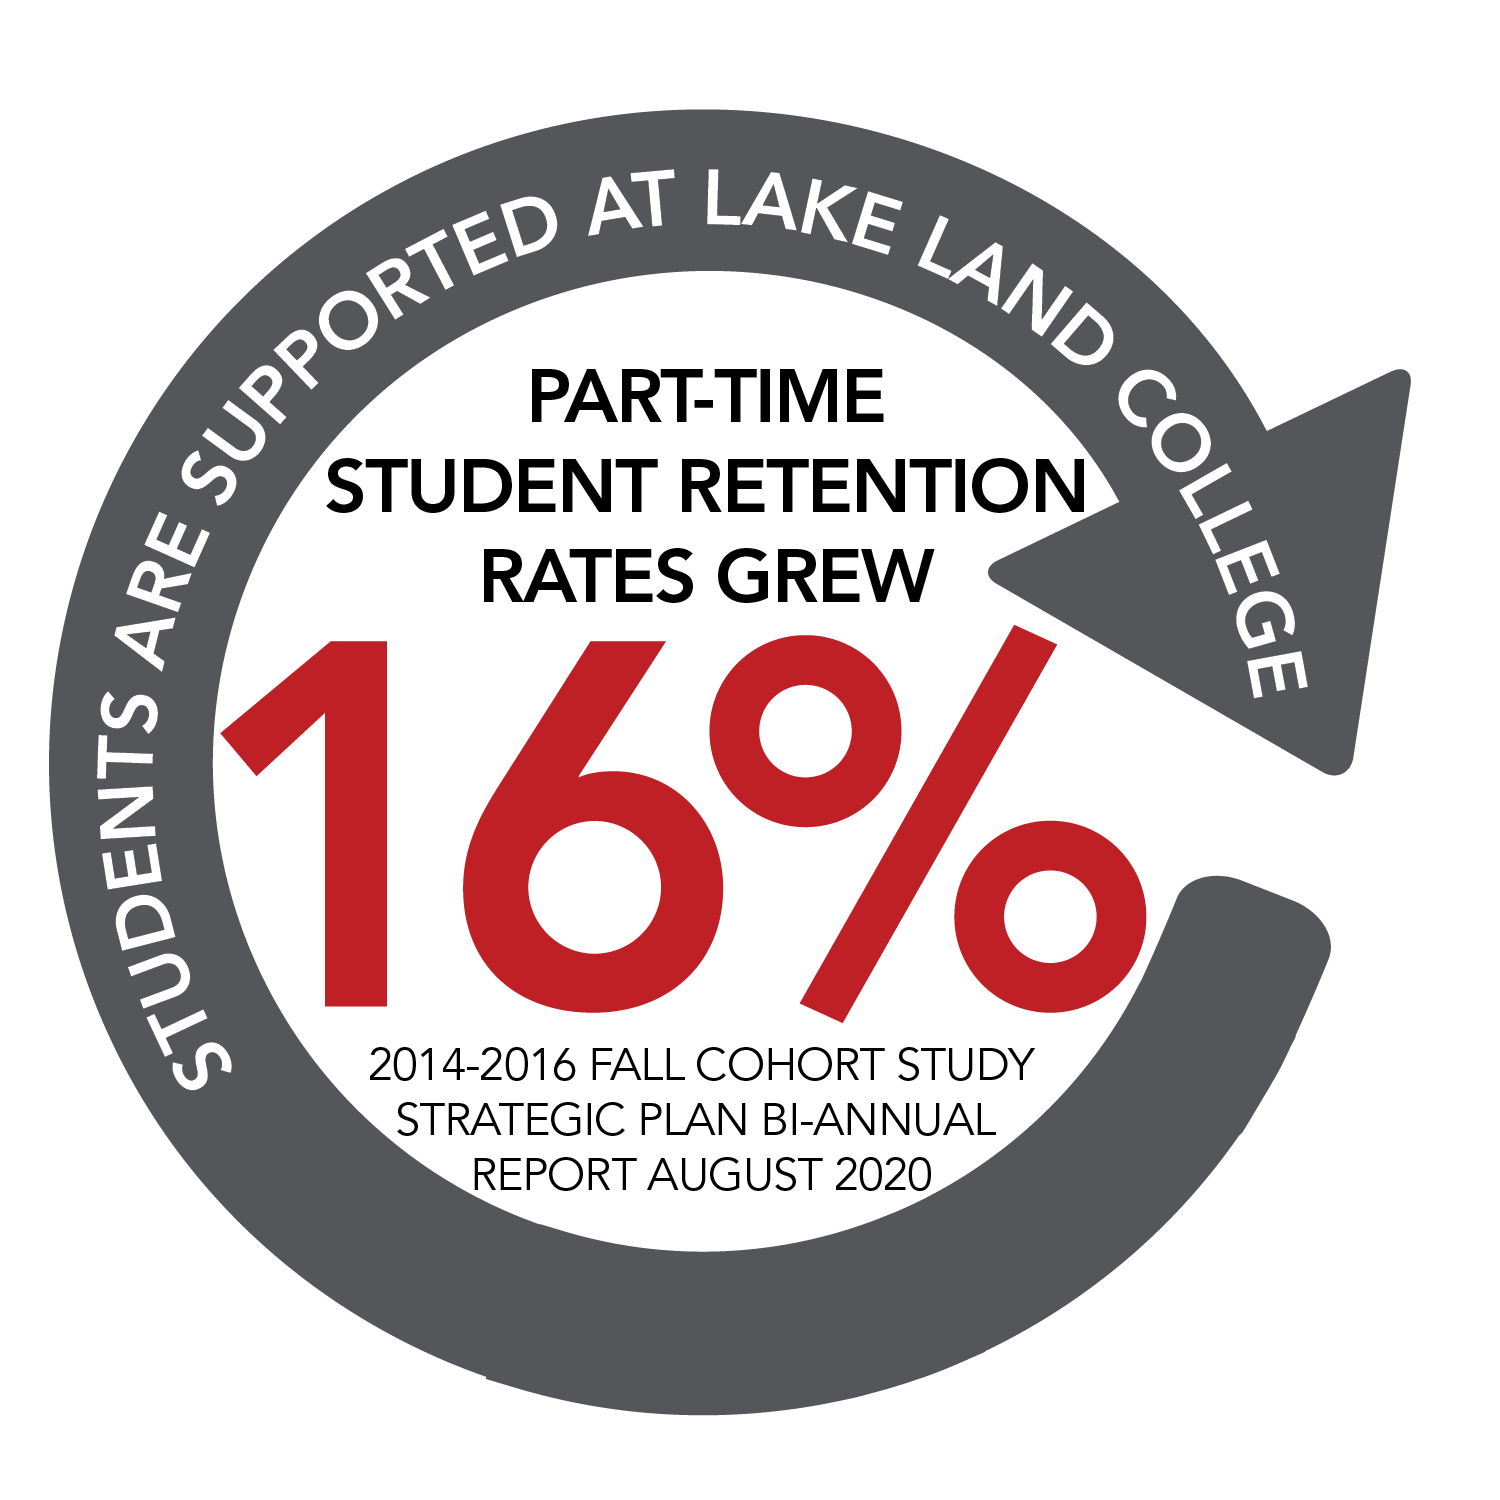 https://www.lakelandcollege.edu/wp-content/uploads/2021/05/Part-Time-Rention-Rate-Growth-01-01.png